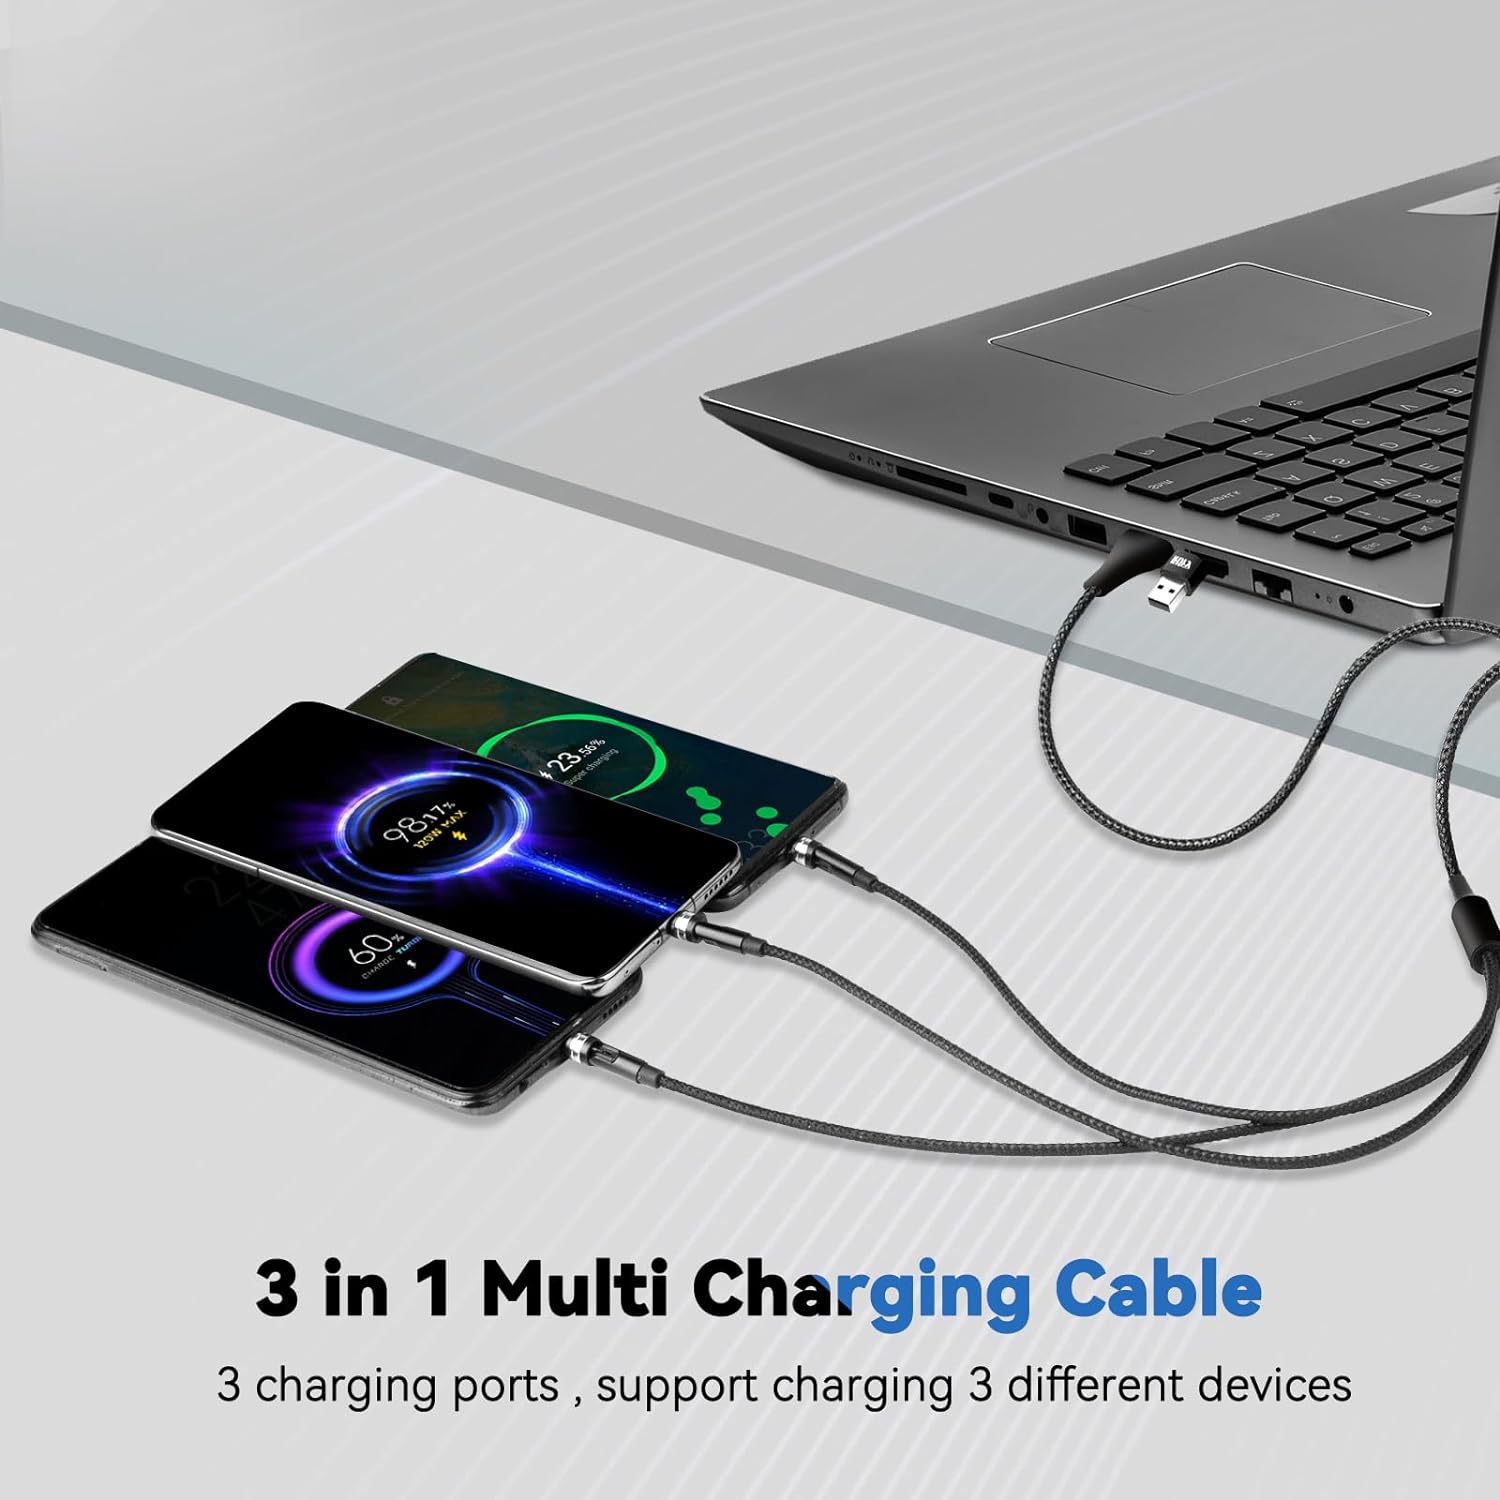 LHJRY Rotating Magnetic Multi Charging Cable, 4ft 6-in-1 Multiple Charger Cord Universal USB Magnetic Charge Cord Compatible with Phone/Micro USB/TypeC All Devices